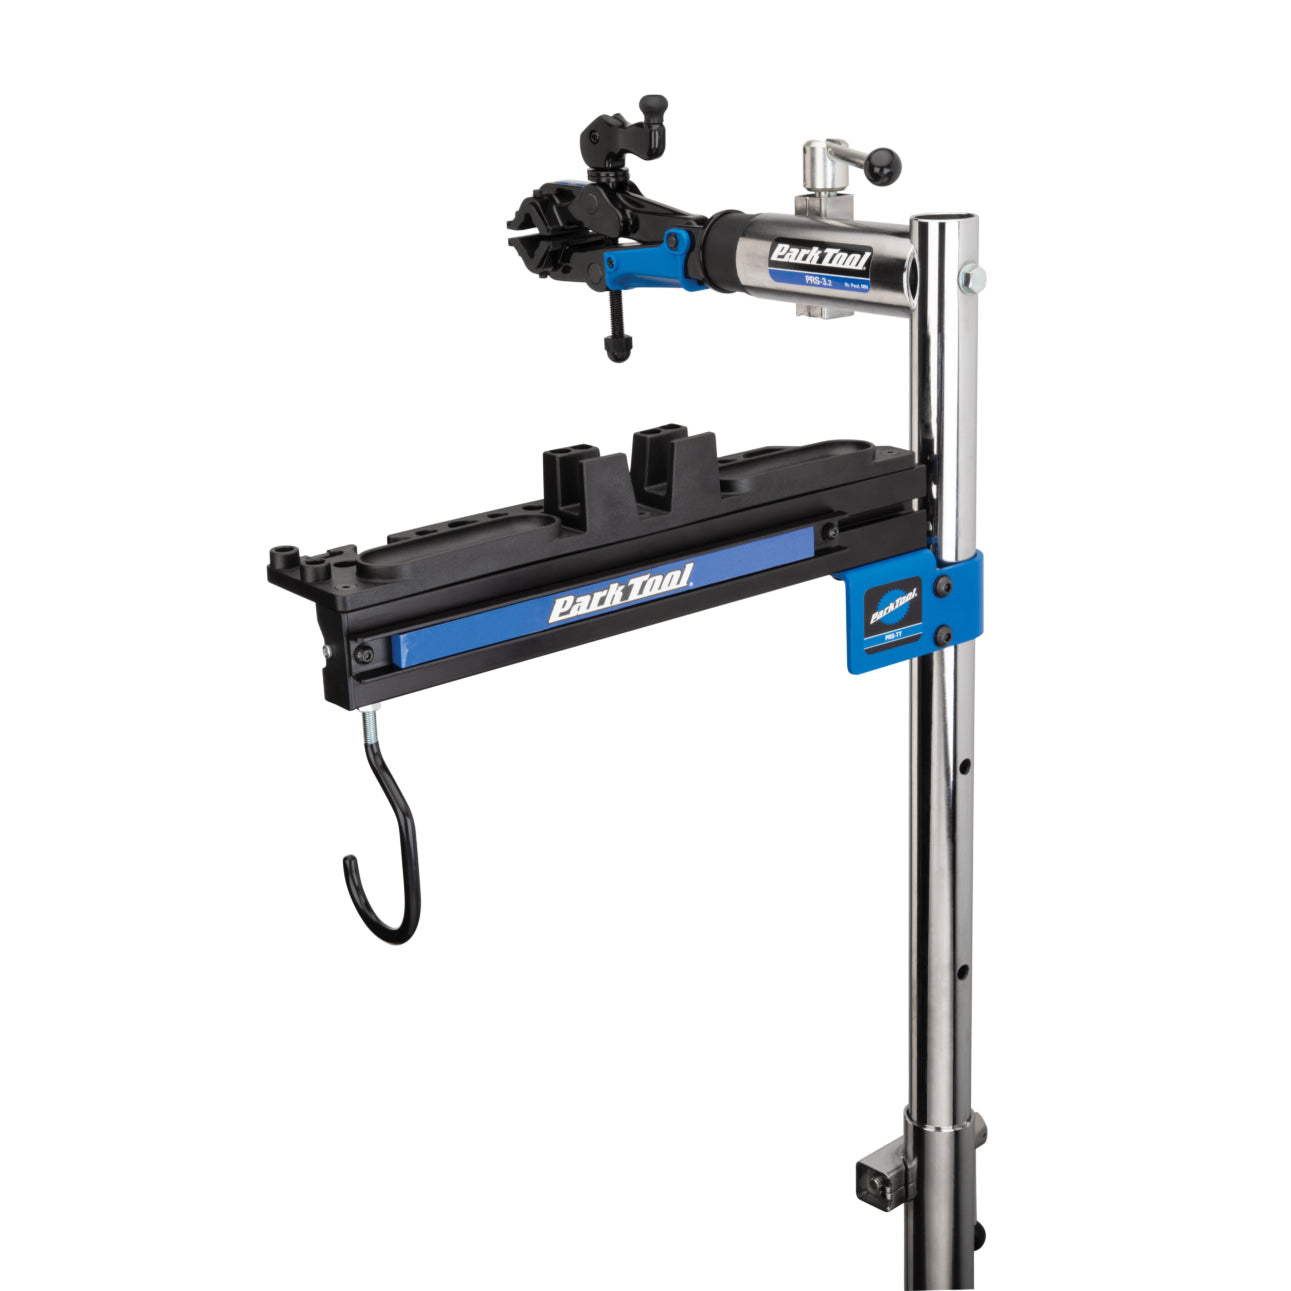 Park Tool PRS-TT Deluxe Tool and Work Tray - The Bikesmiths